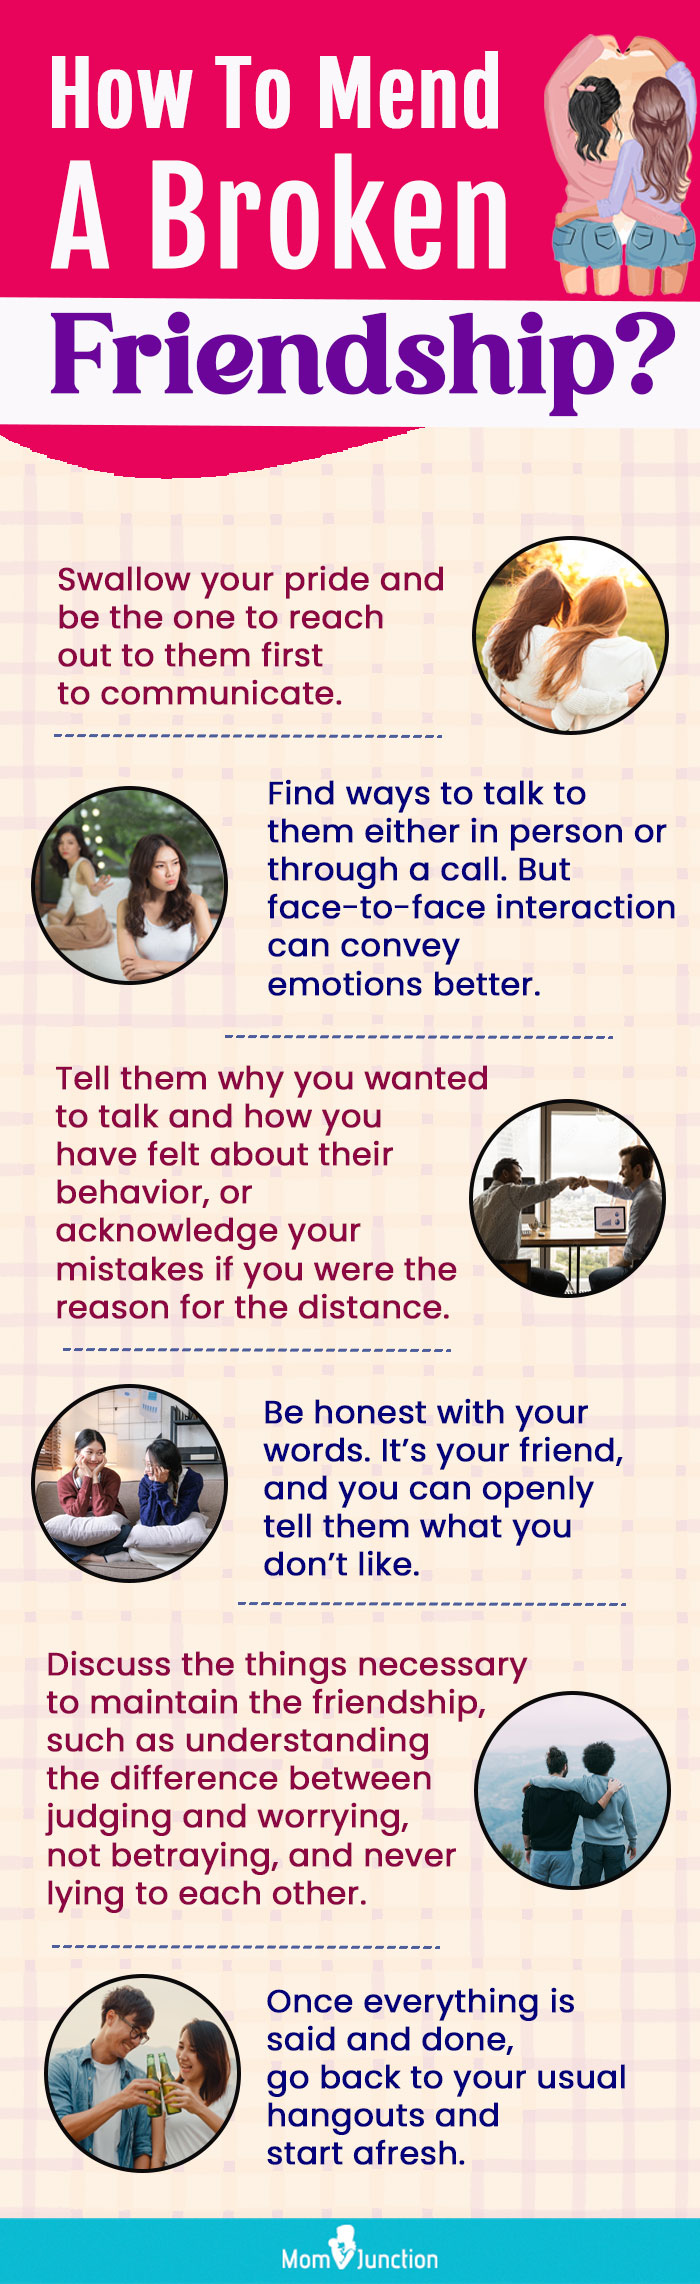 how to mend a broken friendship (infographic)